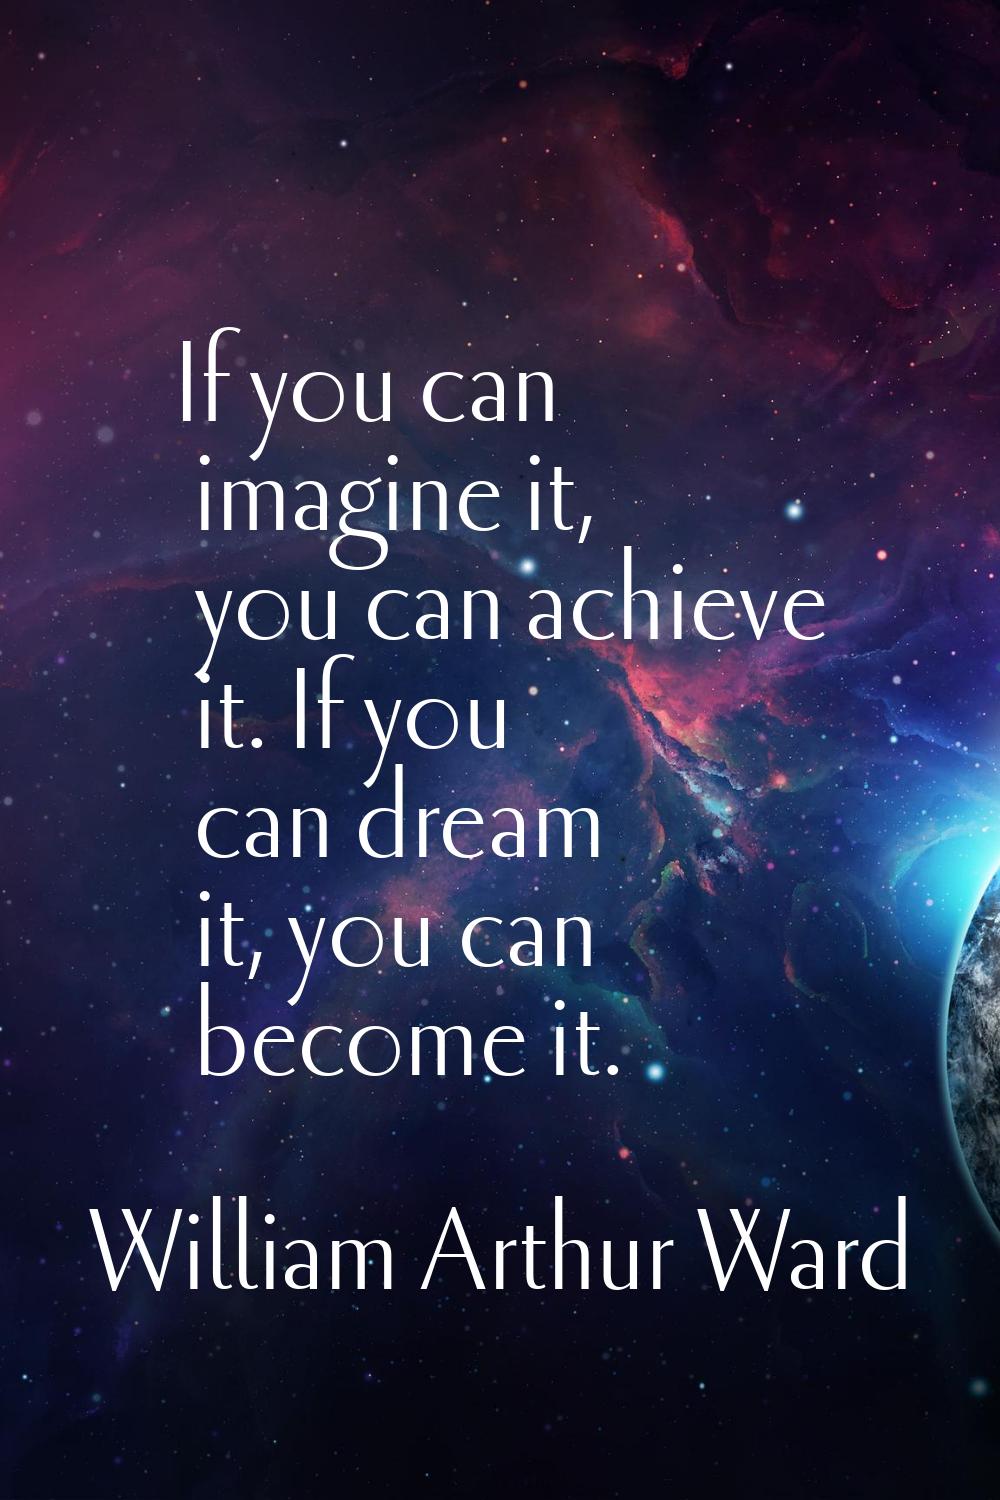 If you can imagine it, you can achieve it. If you can dream it, you can become it.